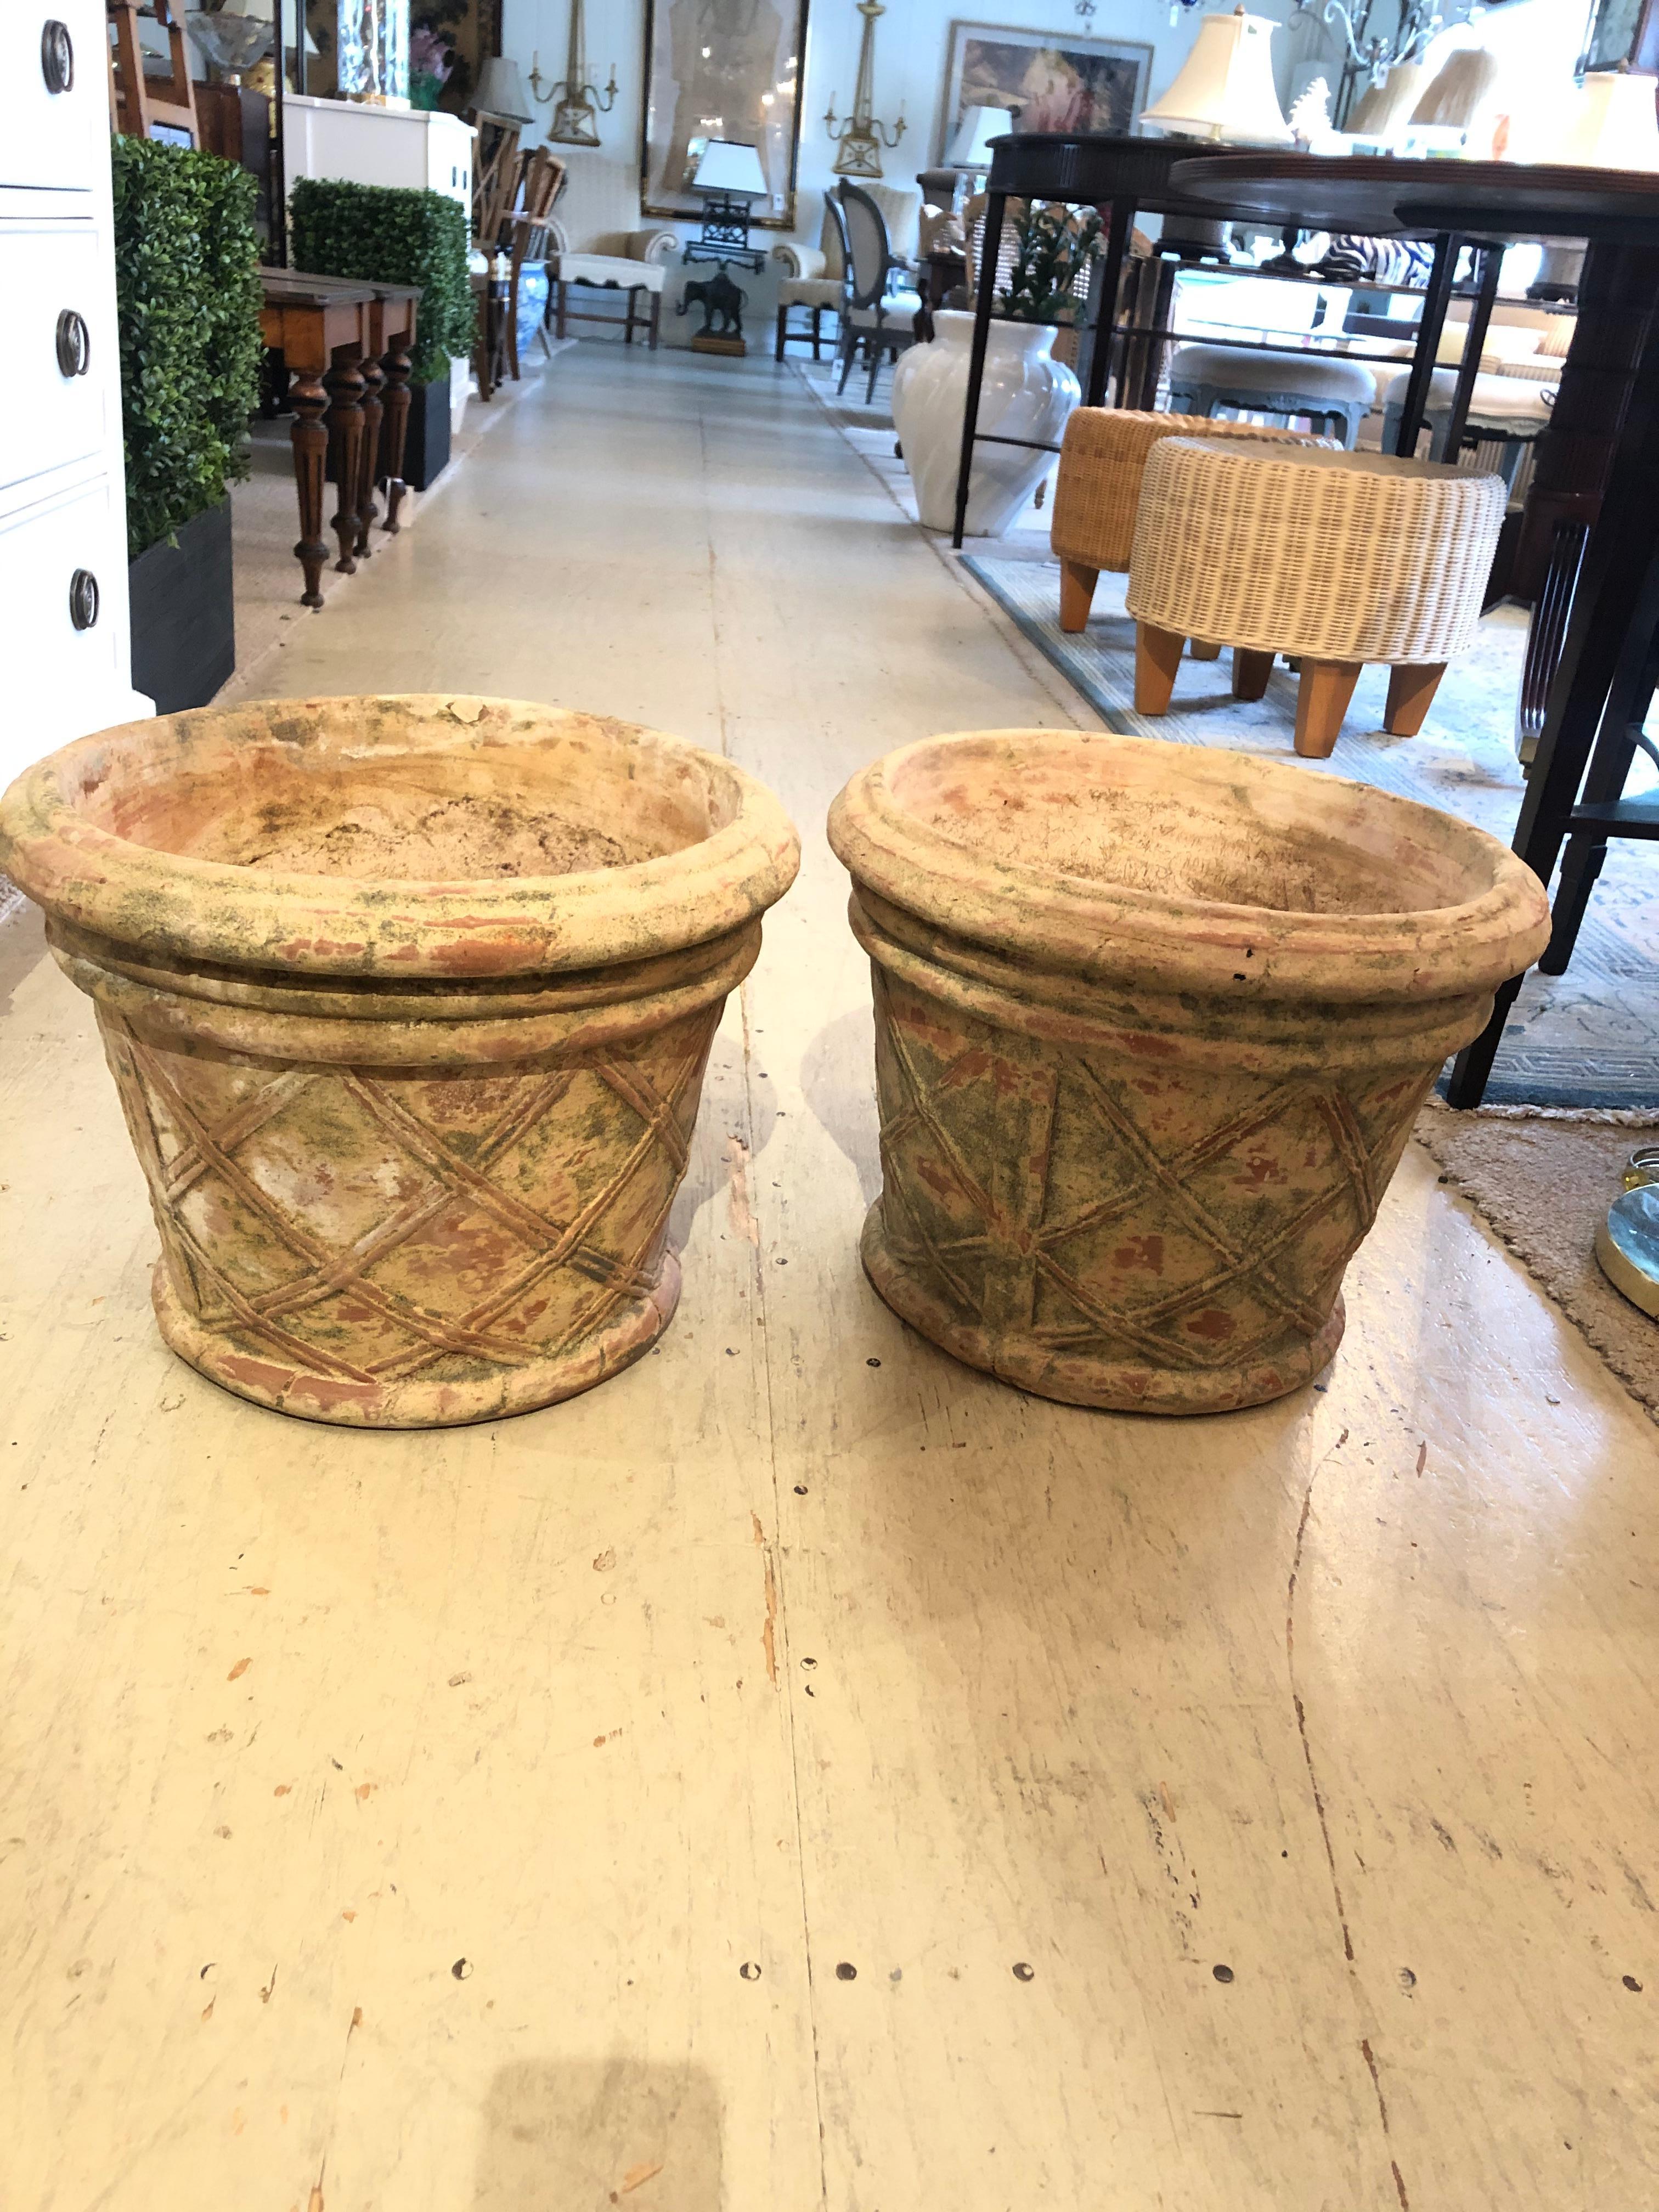 Great looking medium sized terracotta urns having relief lattice design and wonderful natural aged coloration.